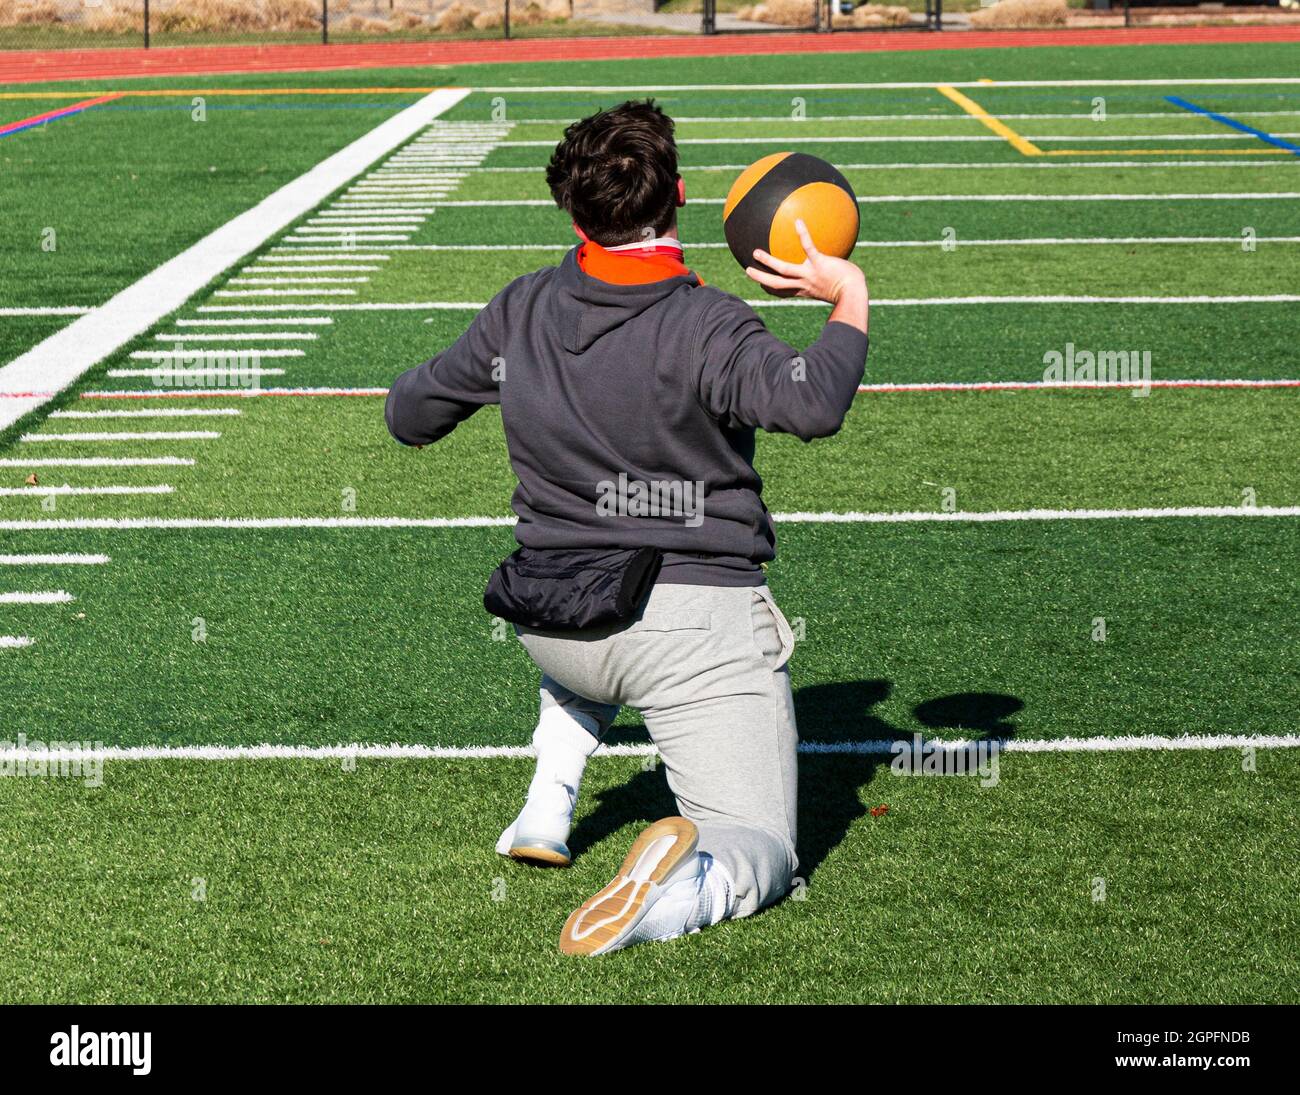 Rear view of a shot put track and field athlete on his knees training by throwing a medicine ball on a green turf field. Stock Photo